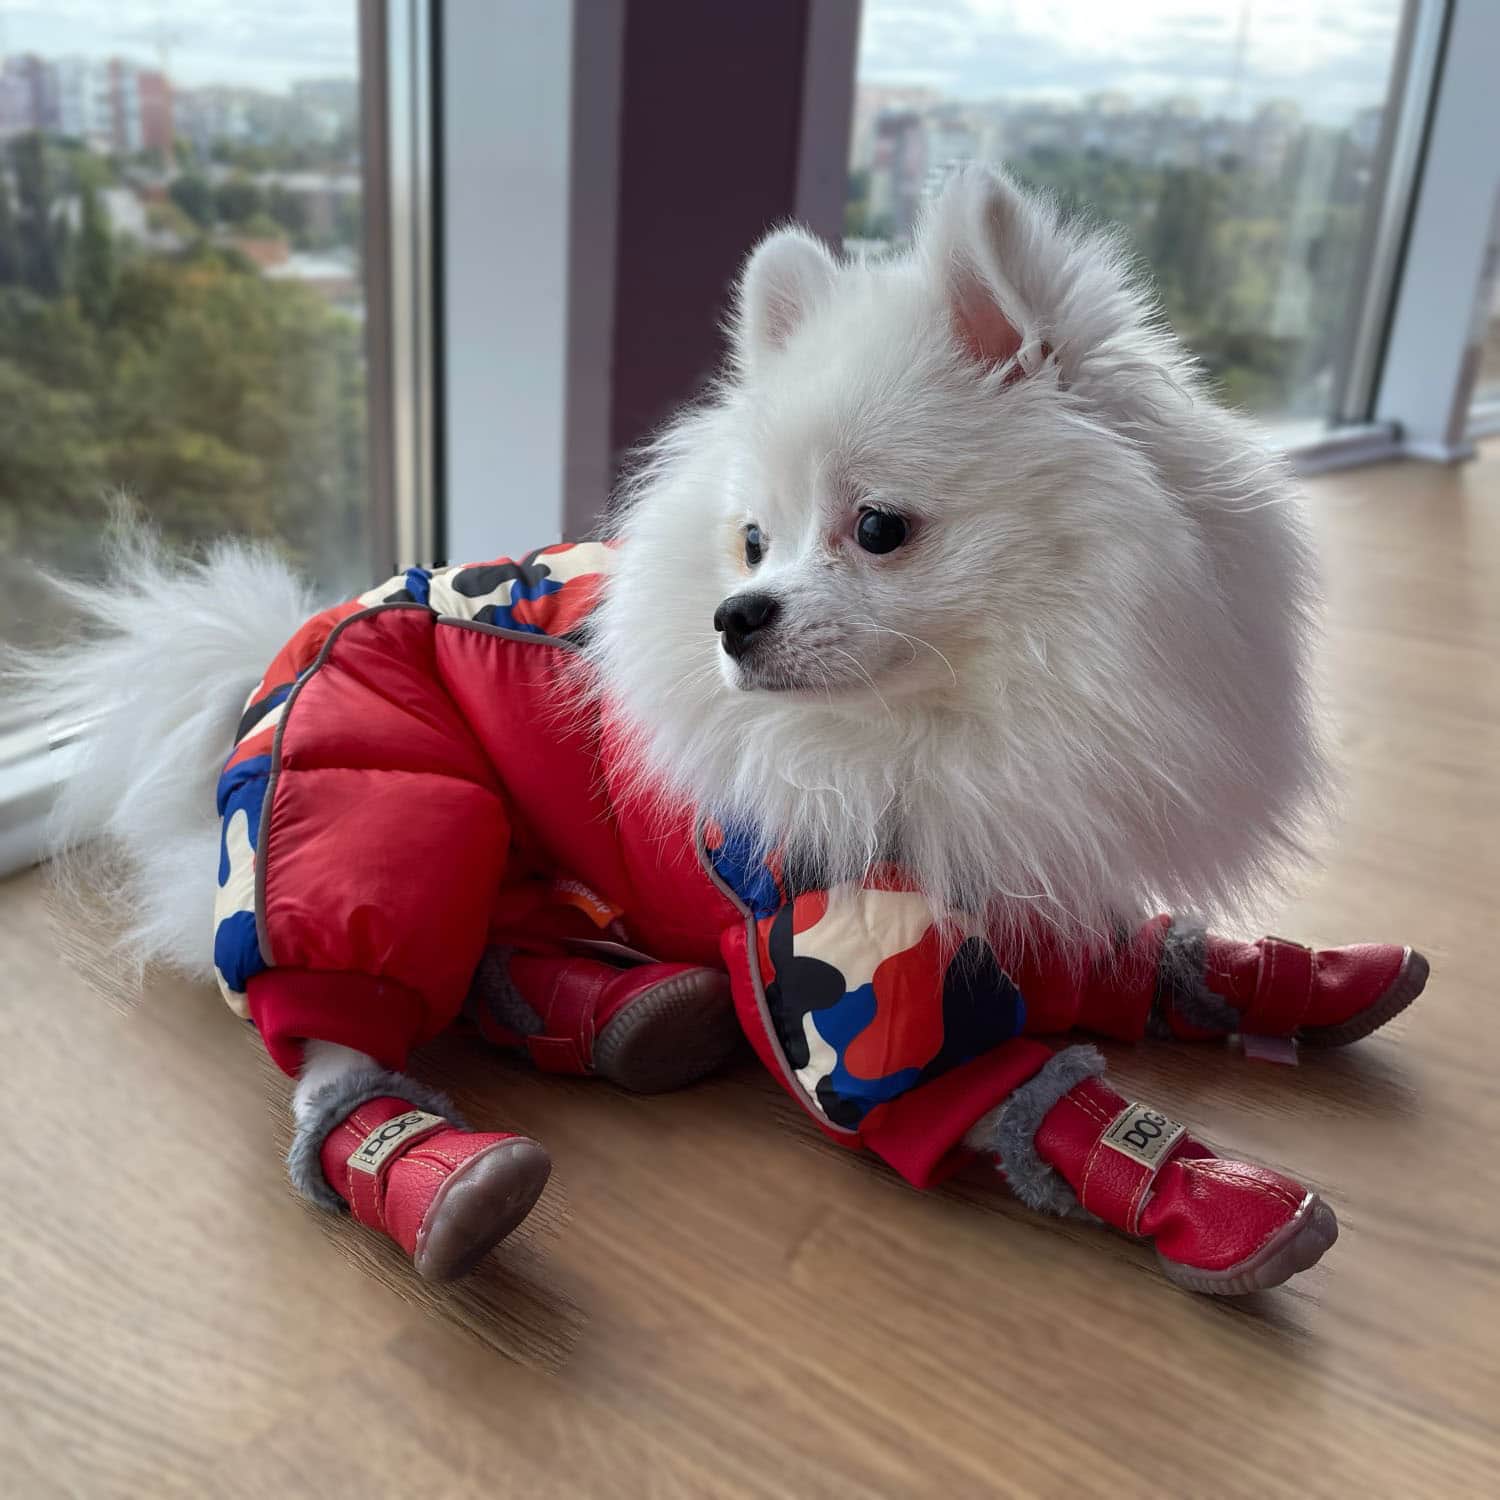 Small white dog in a red   DogSki Suit™ - Waterproof Winter Jacket Harness for Small to Medium Dogs sitting on a floor